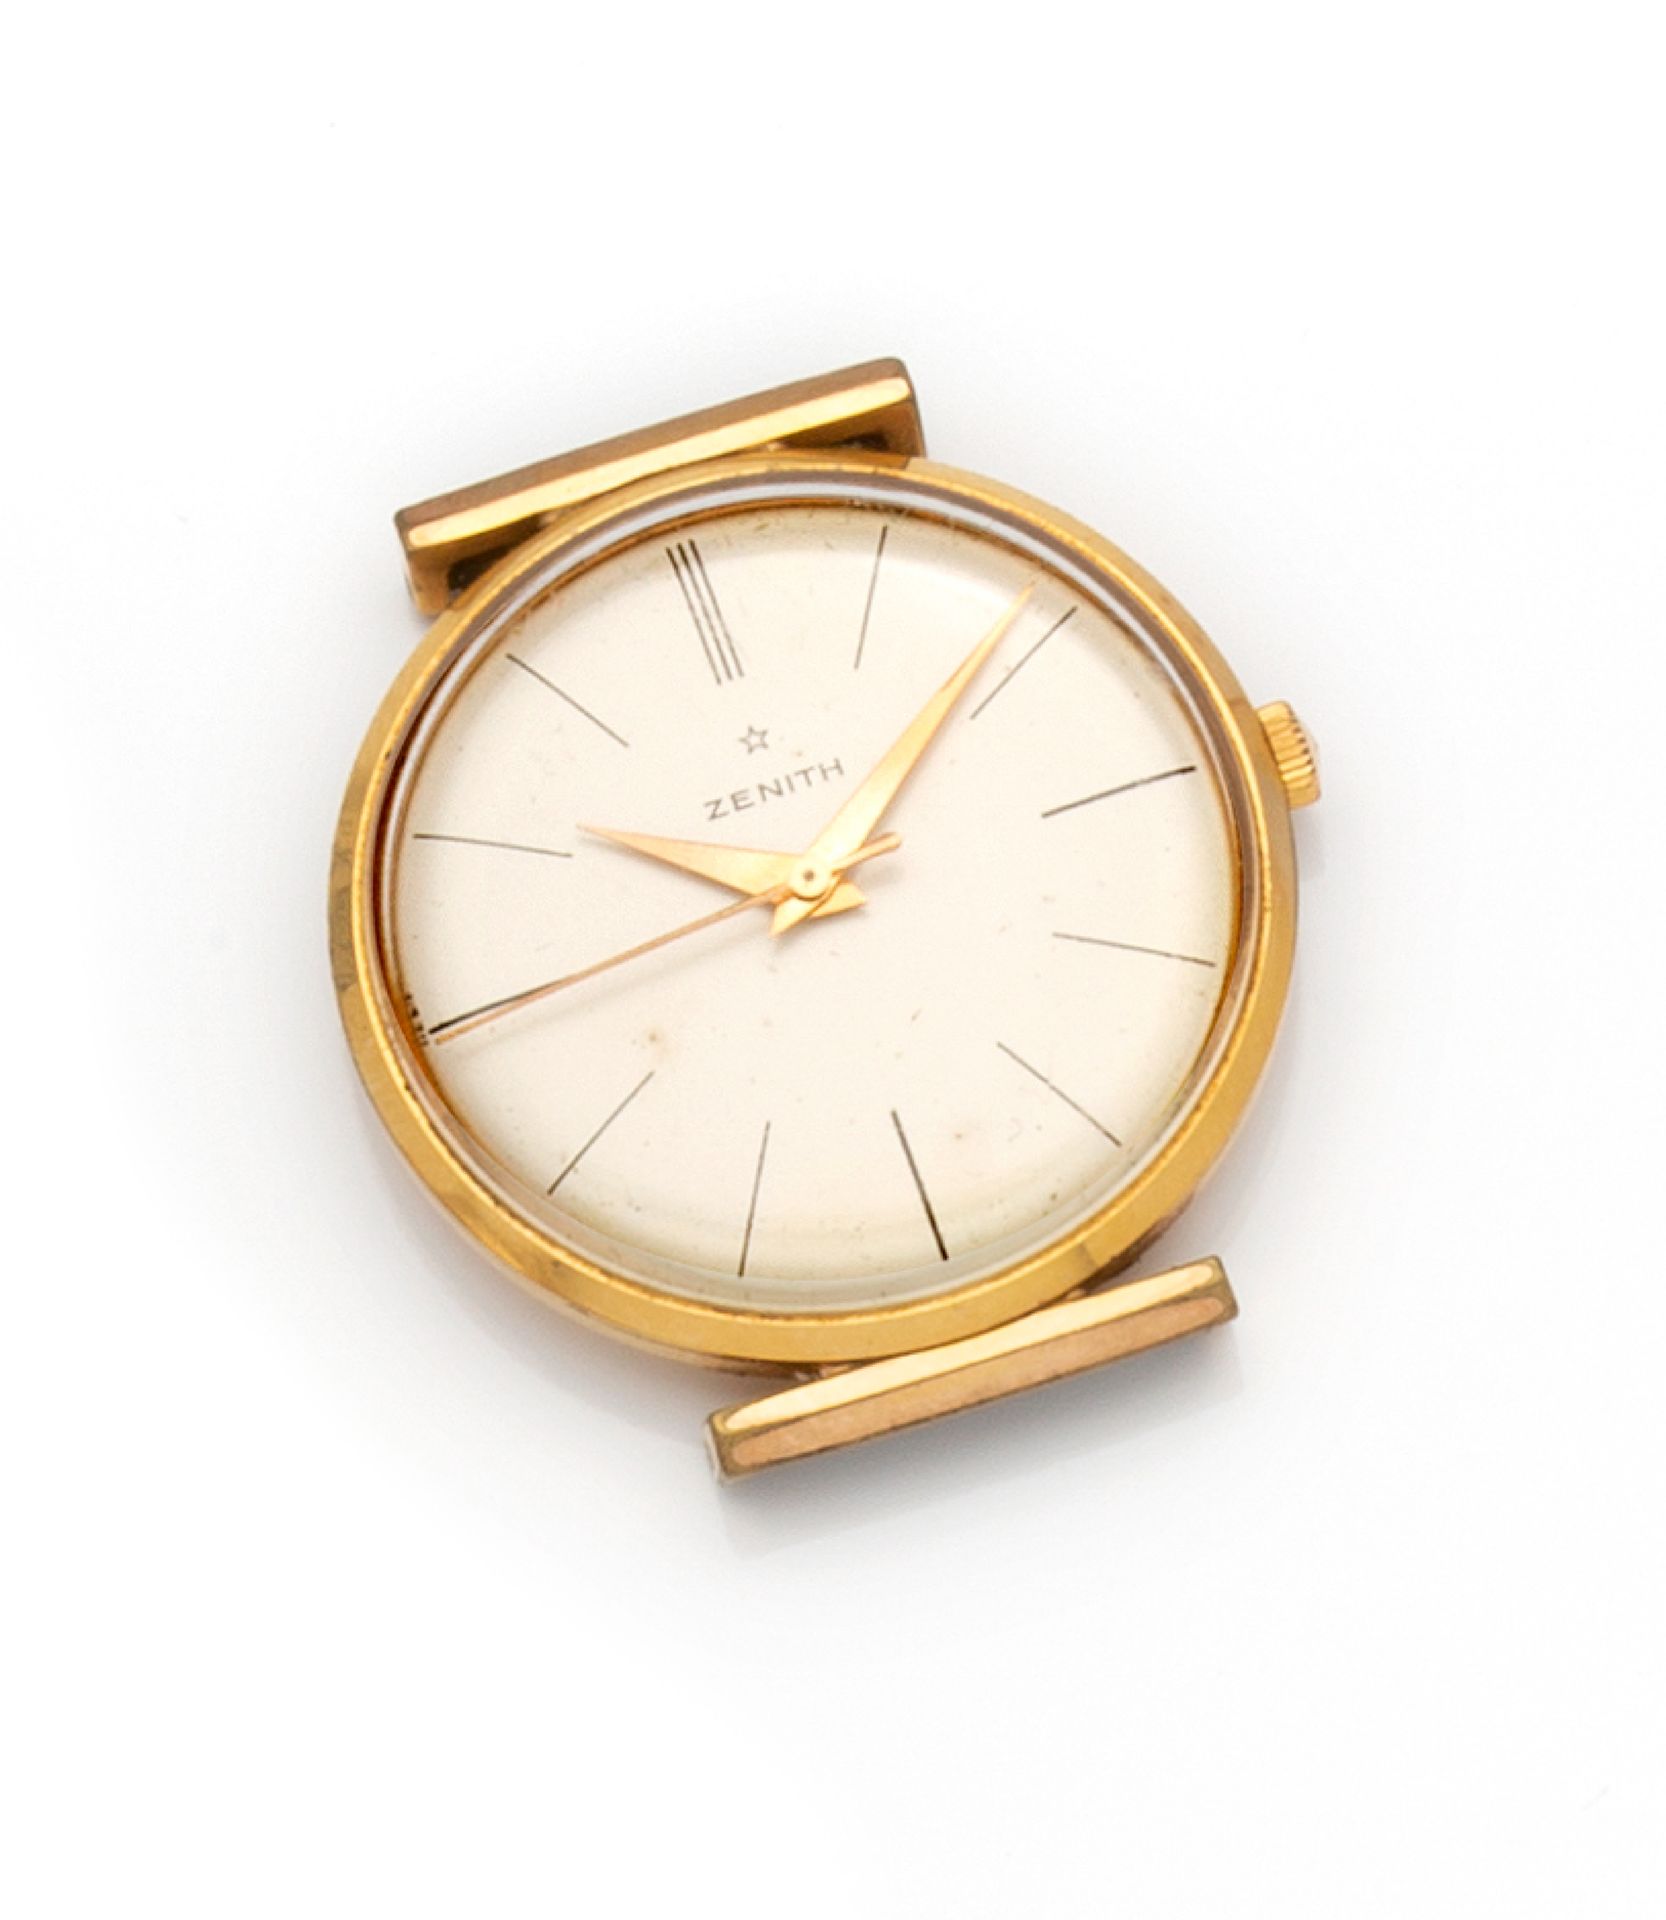 Null Zenith

20 micron gold-plated dress watch with mechanical movement.

- Roun&hellip;